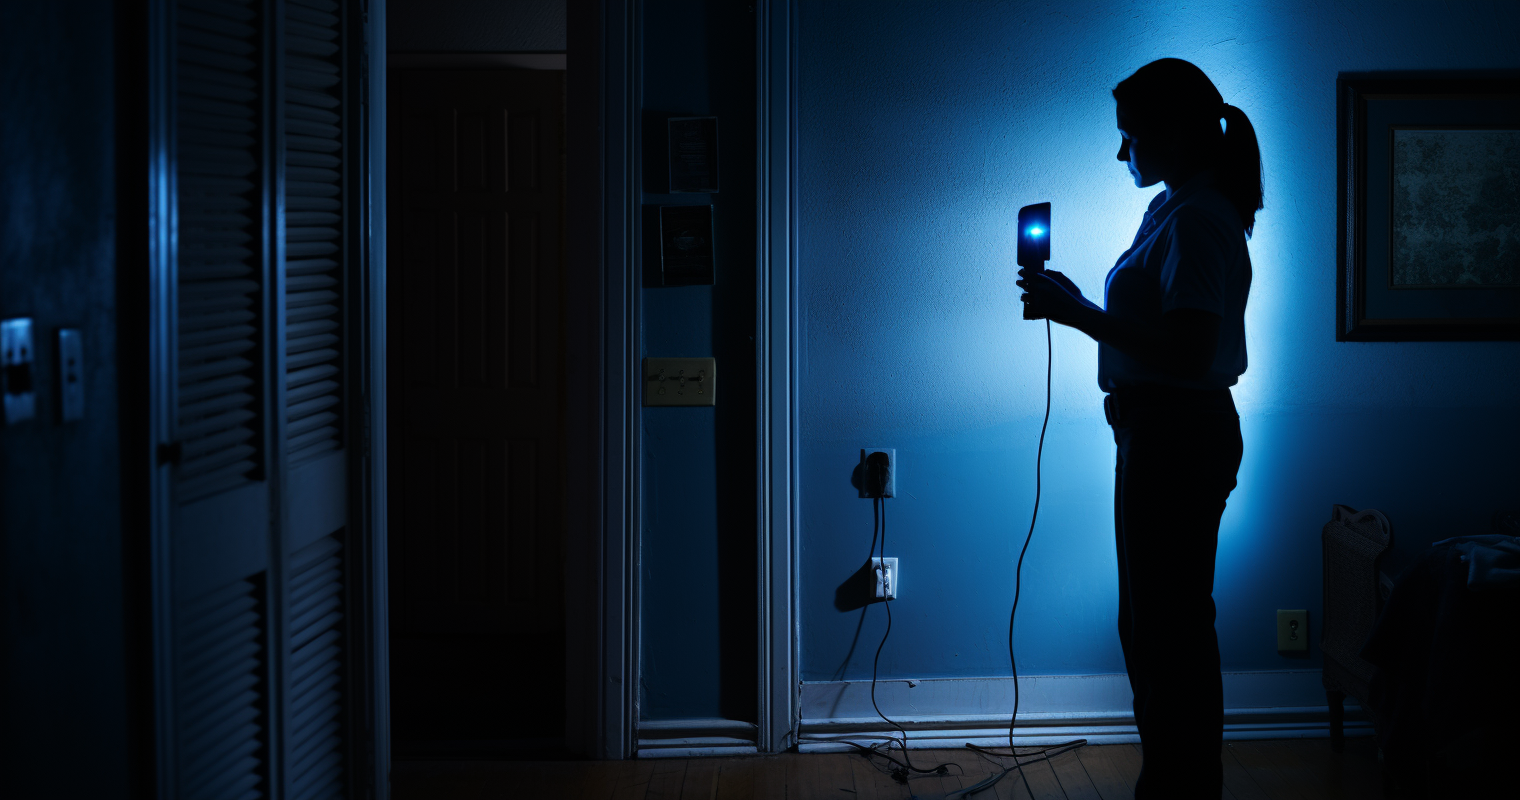 DIY Enthusiast Using Stud Finder in Dimly Lit Room